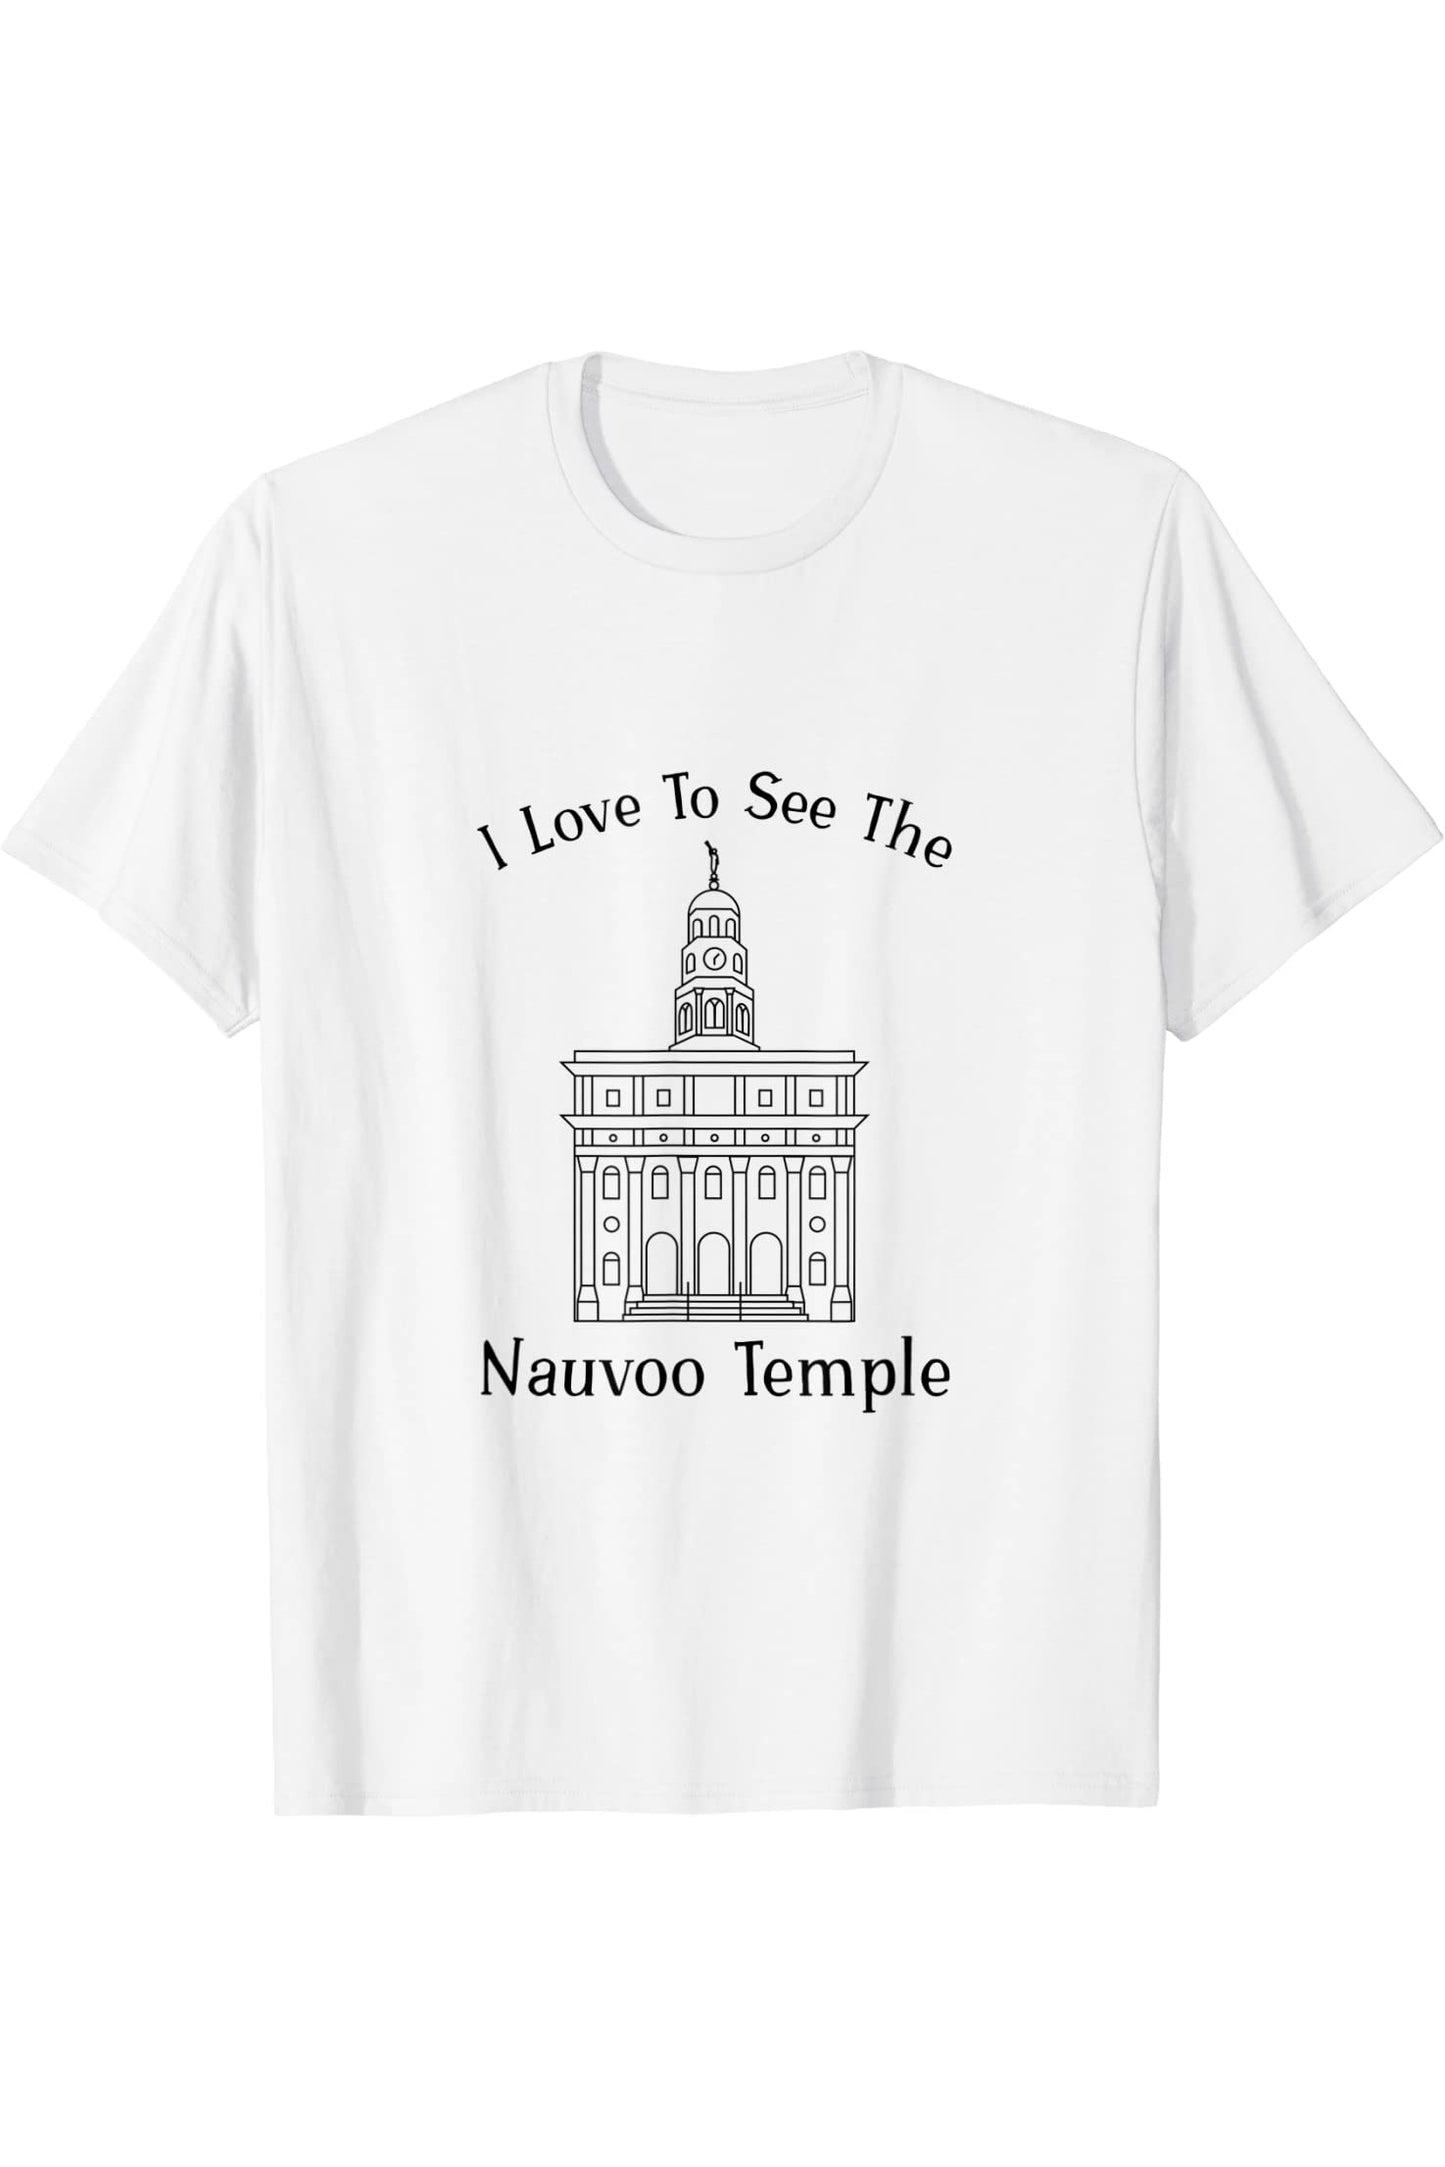 Nauvoo IL Tempel, I love to see my temple, happy T-Shirt